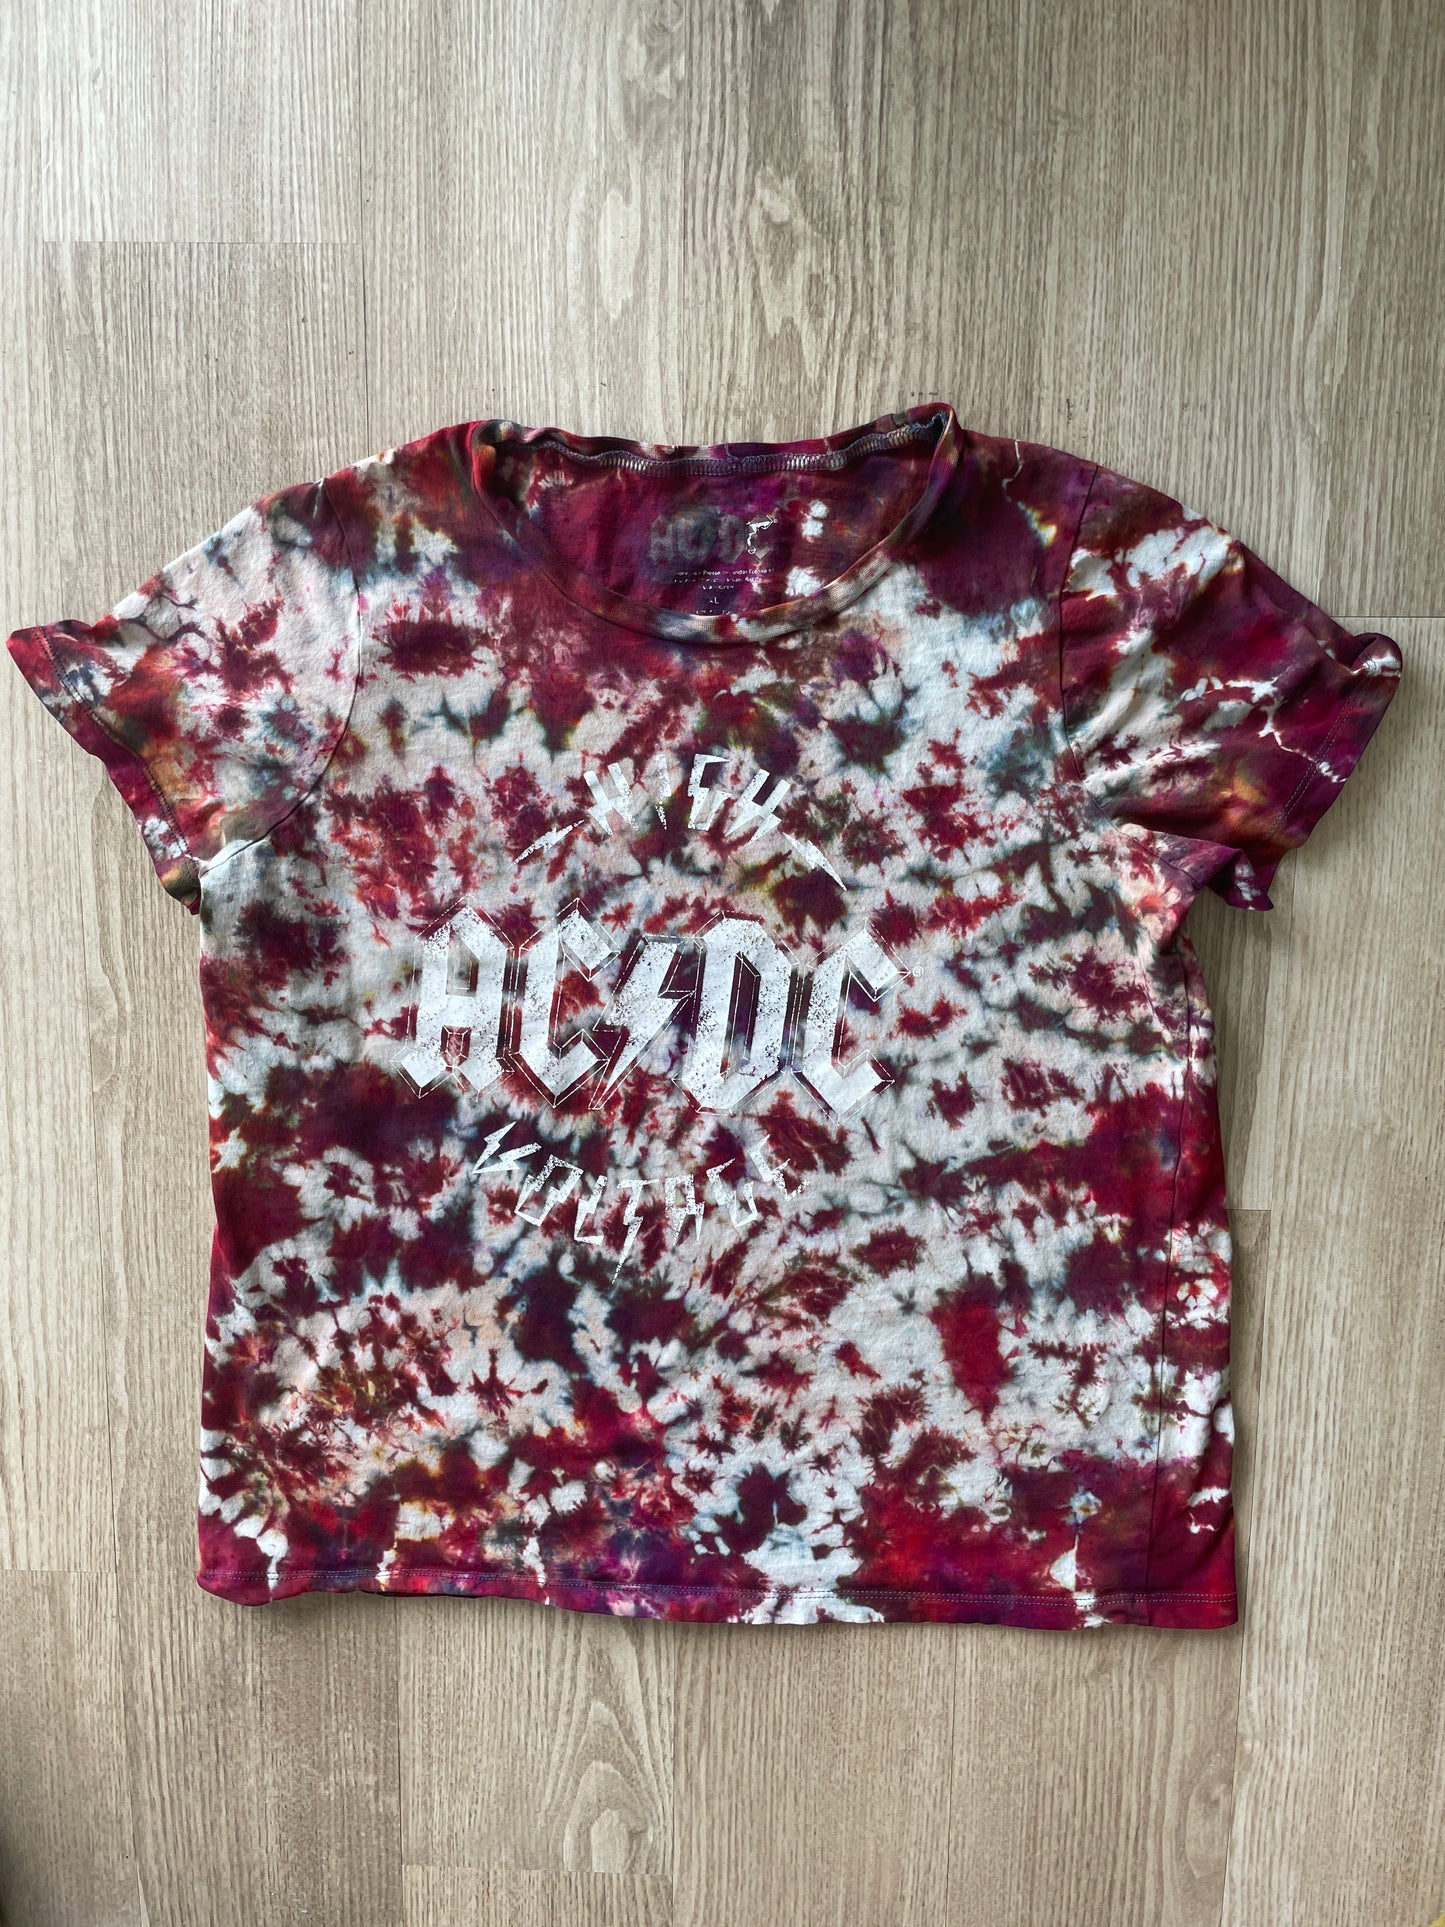 XL Women's AC/DC High Voltage Rock and Roll Handmade Reverse Tie Dye T-Shirt | One-Of-a-Kind Black and Red Short Sleeve